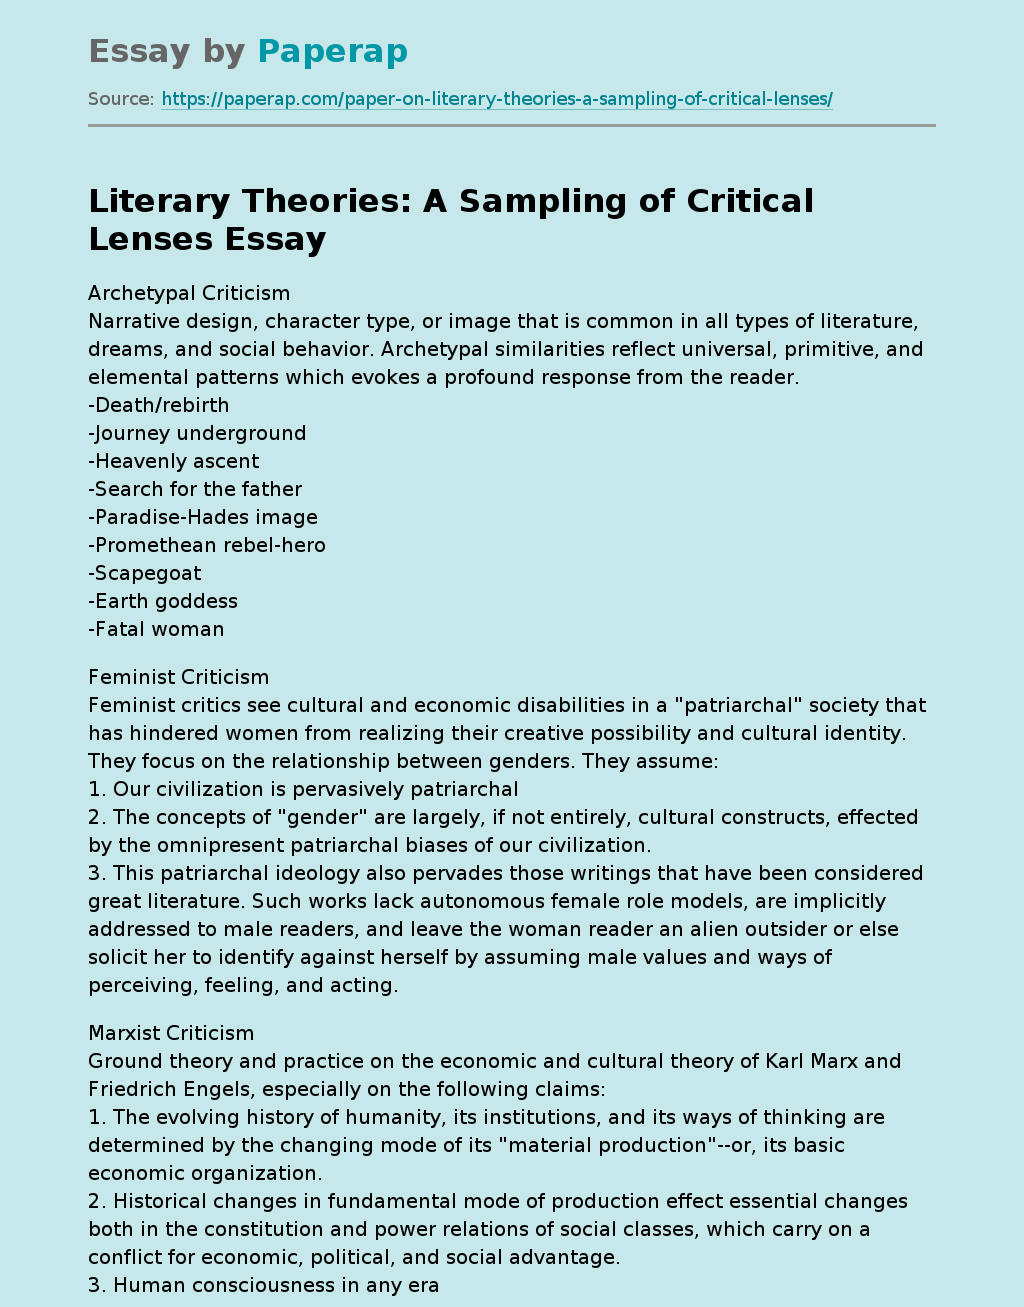 Literary Theories: A Sampling of Critical Lenses